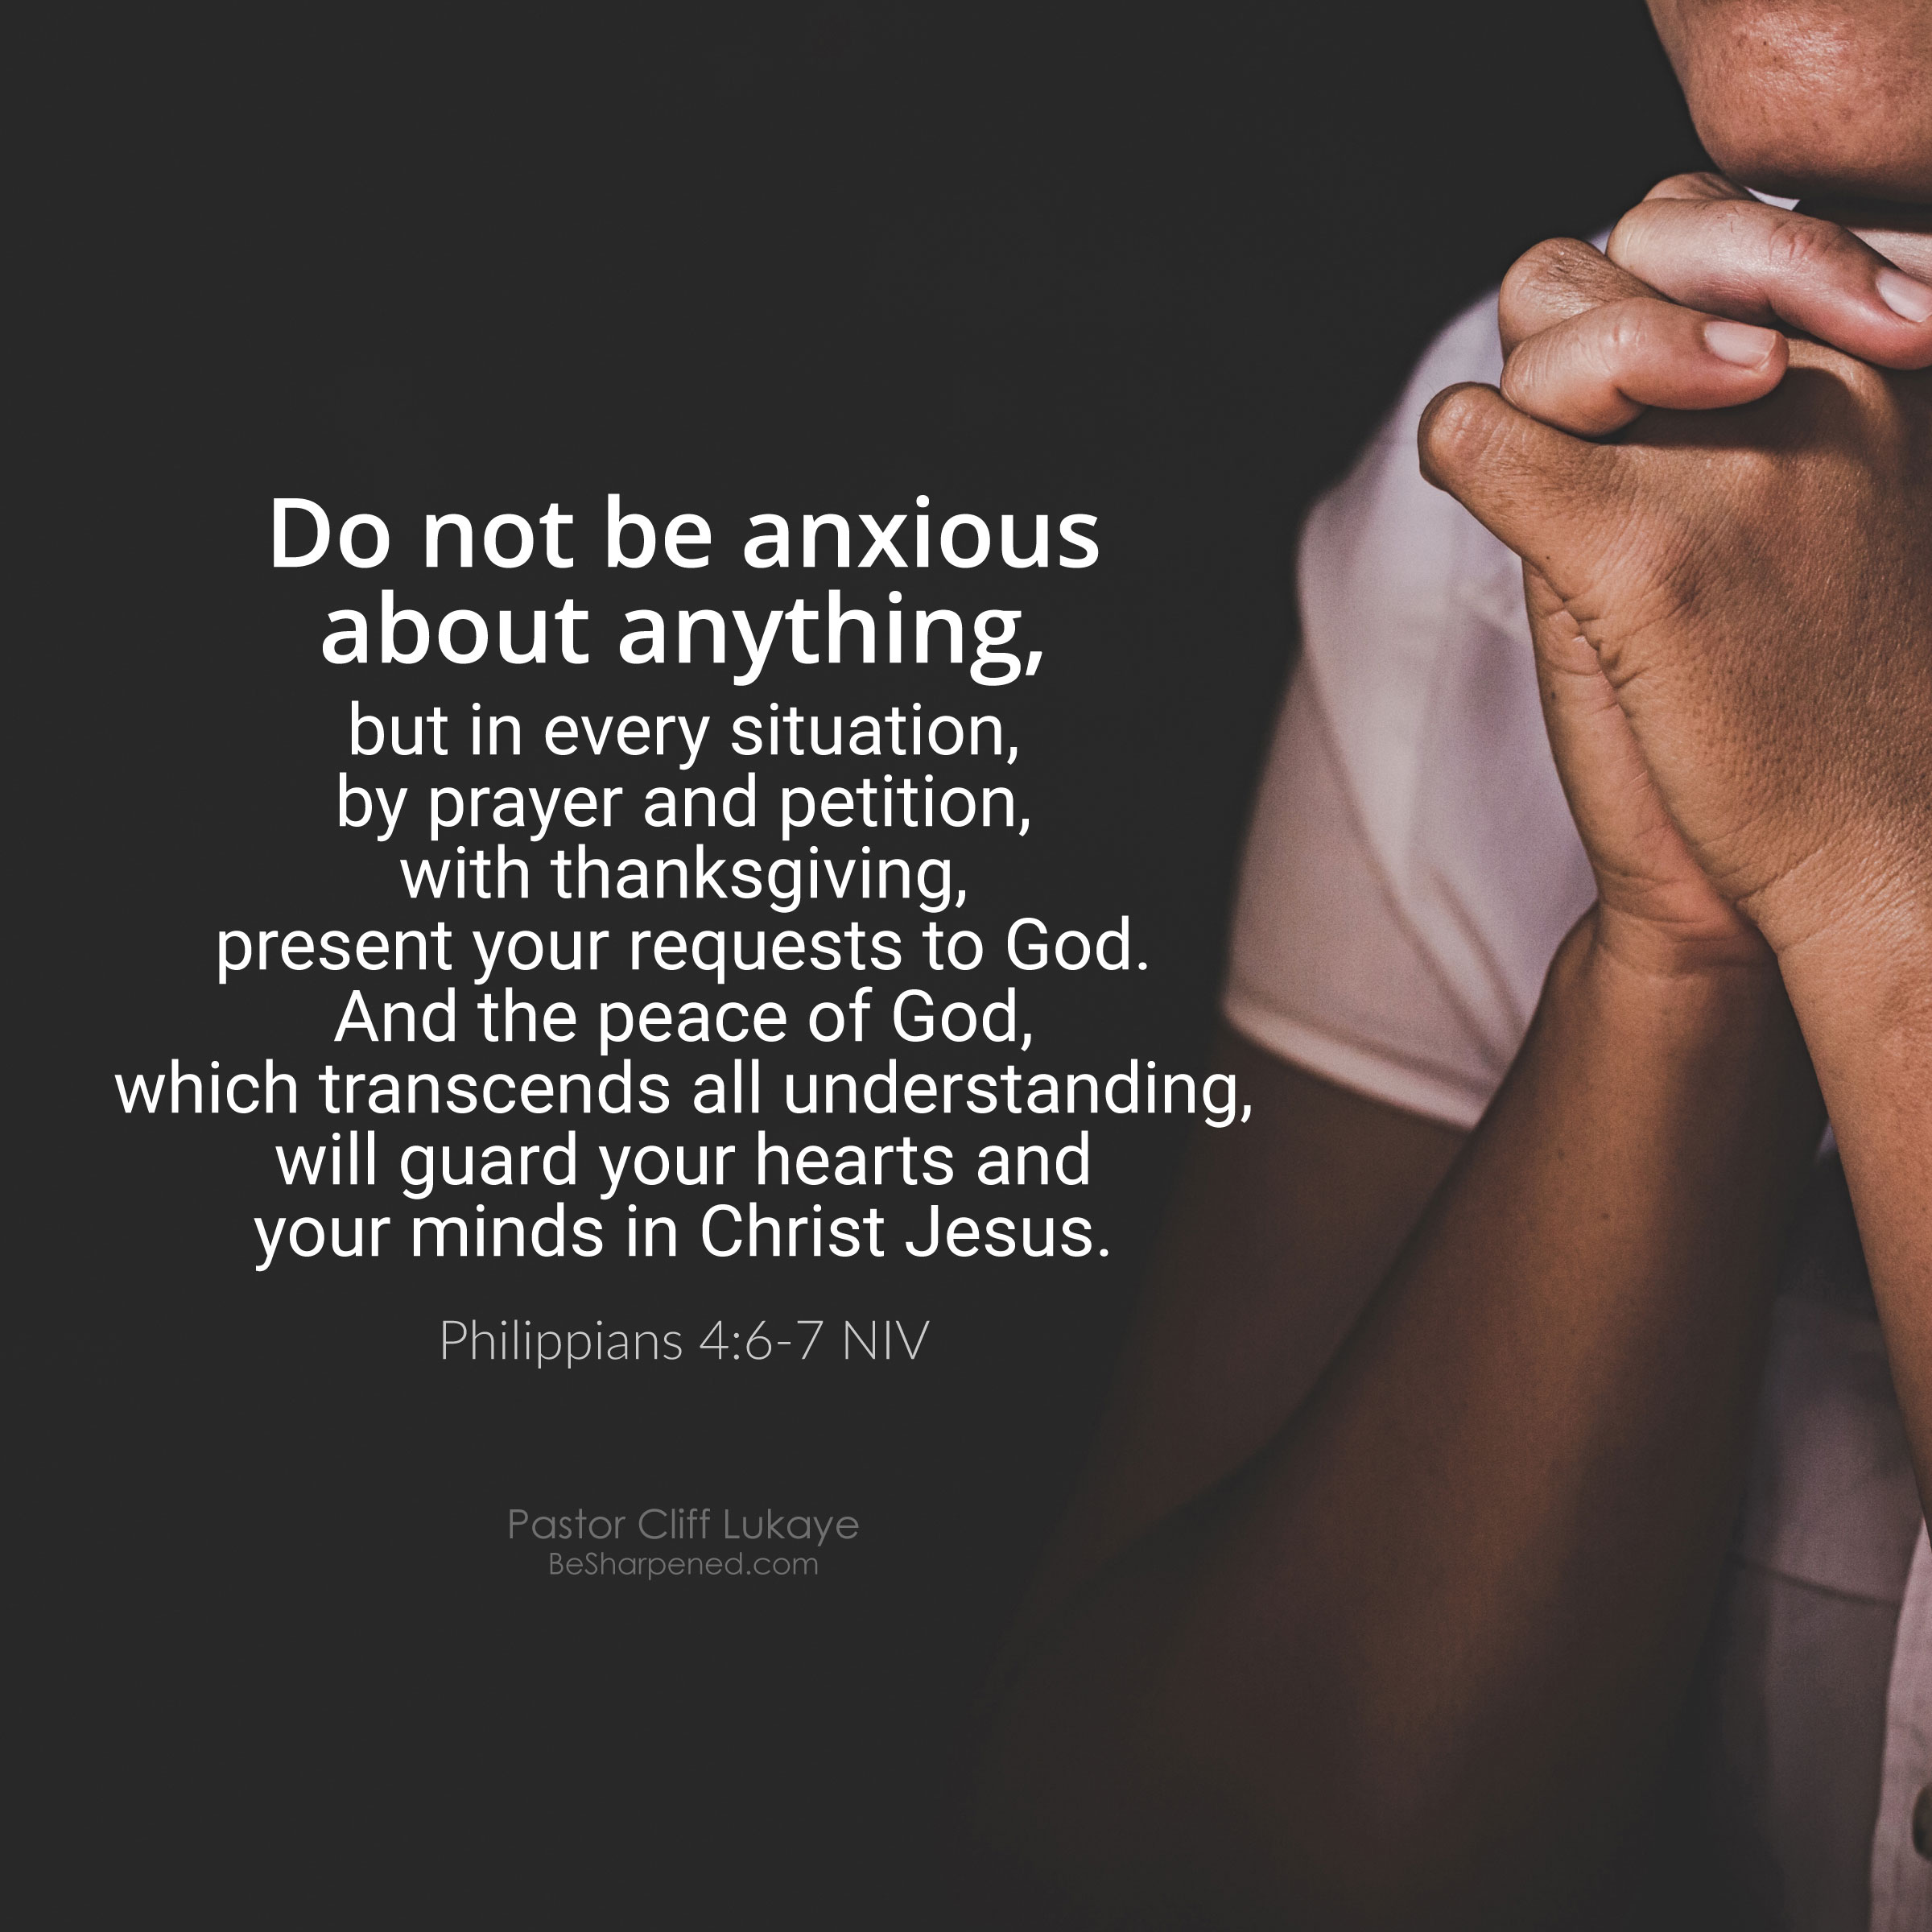 https://besharpened.com/20190312/wp-content/uploads/2022/03/philippians-4-6-7-be-sharpened-verse-of-the-day-daily-devotion.jpg